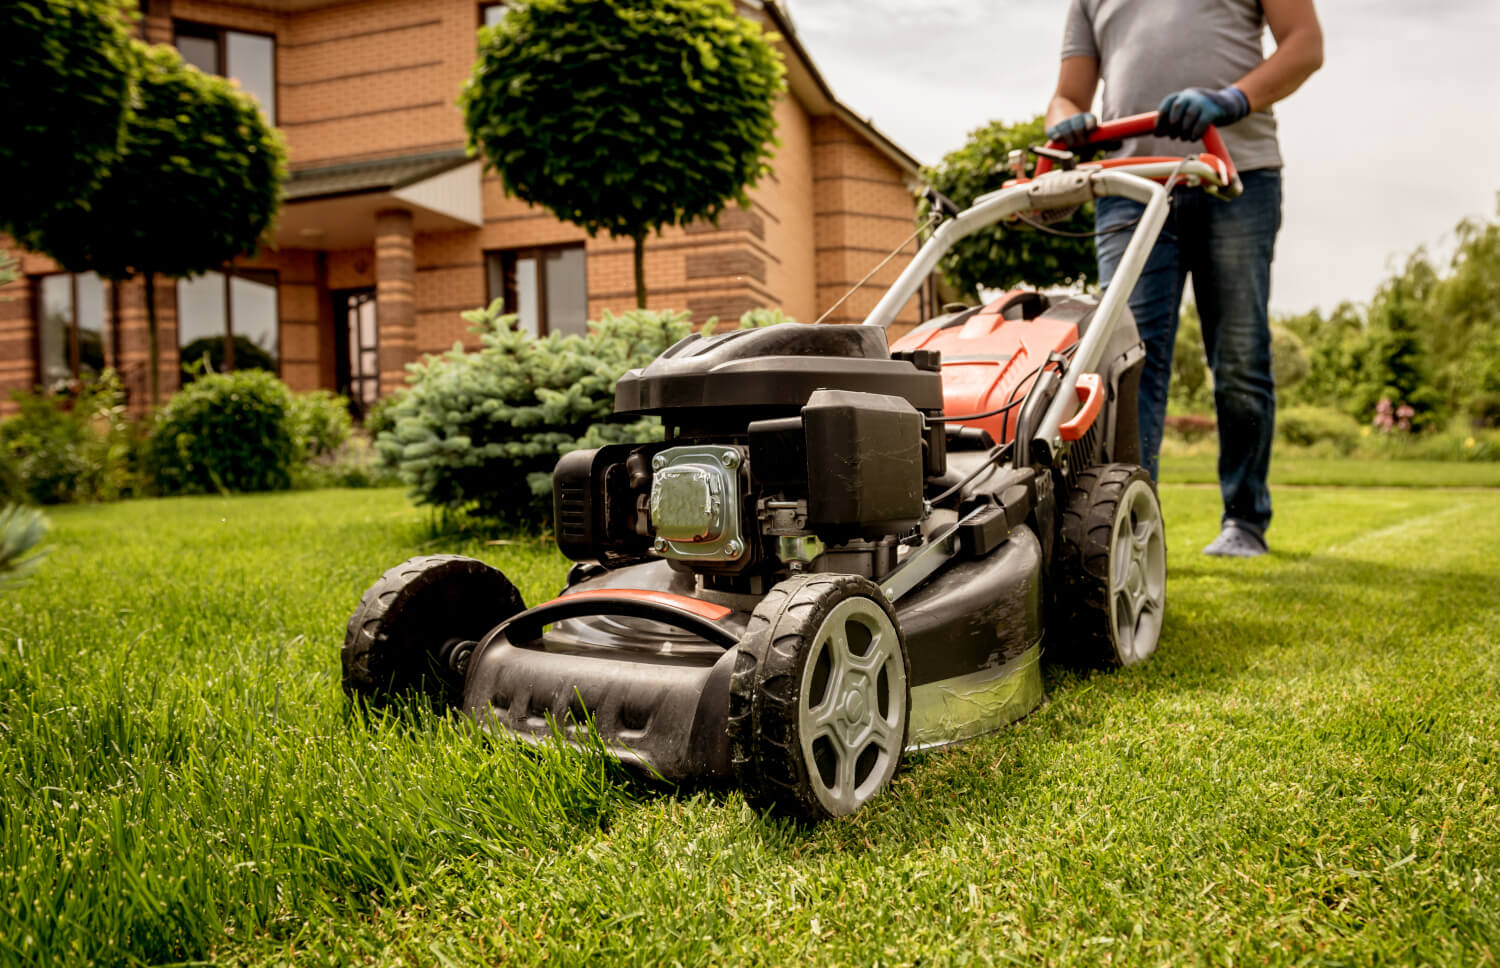 What are the benefits of a commercial landscape maintenance service?